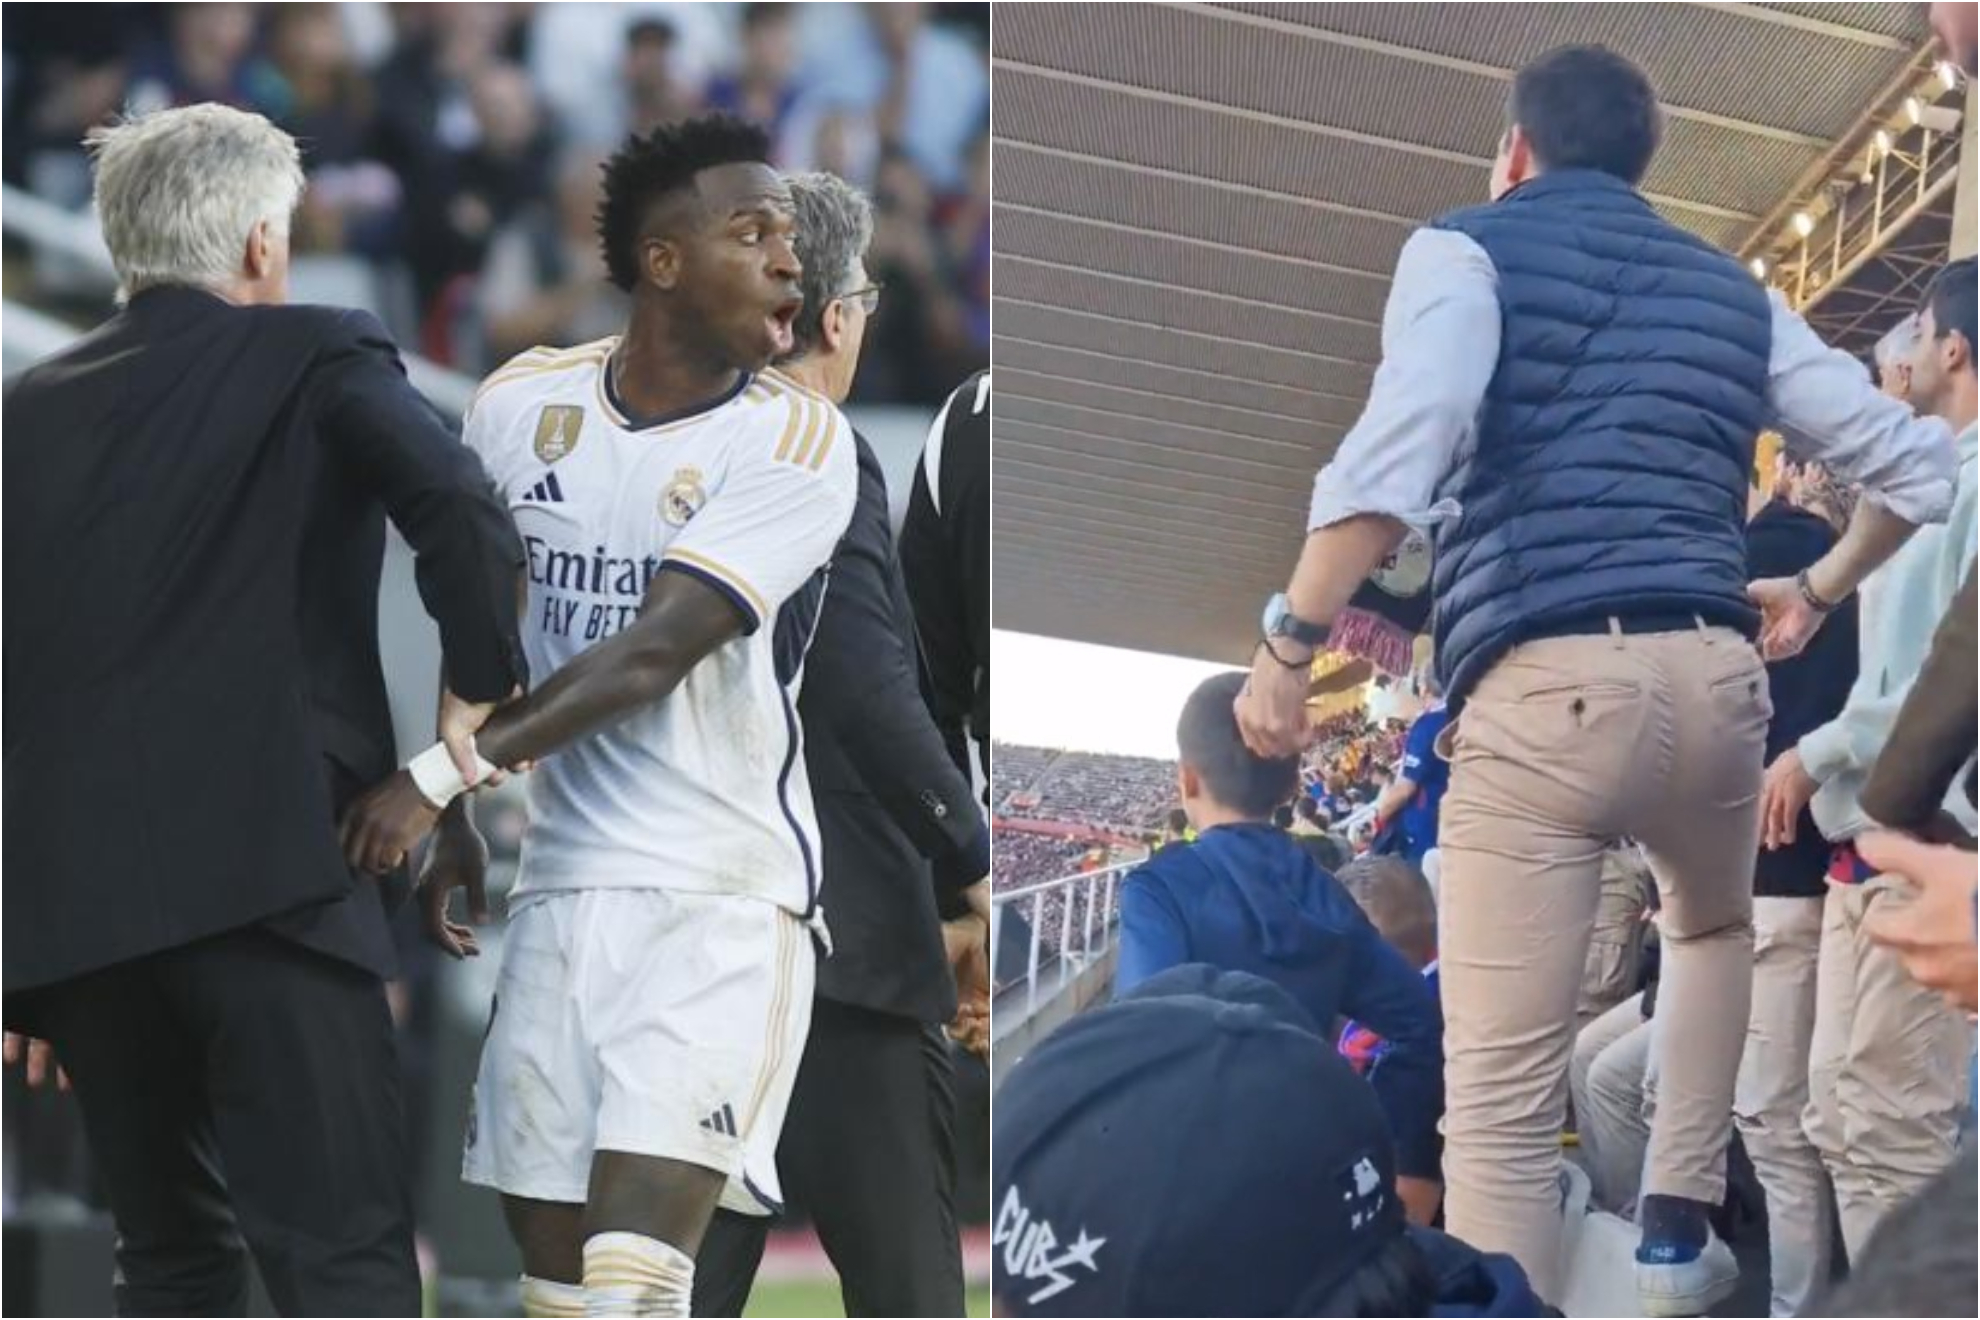 Racist insults and throwing an object that looks like a banana at Vinicius from the stands: F***ing monkey, f***ing monkey